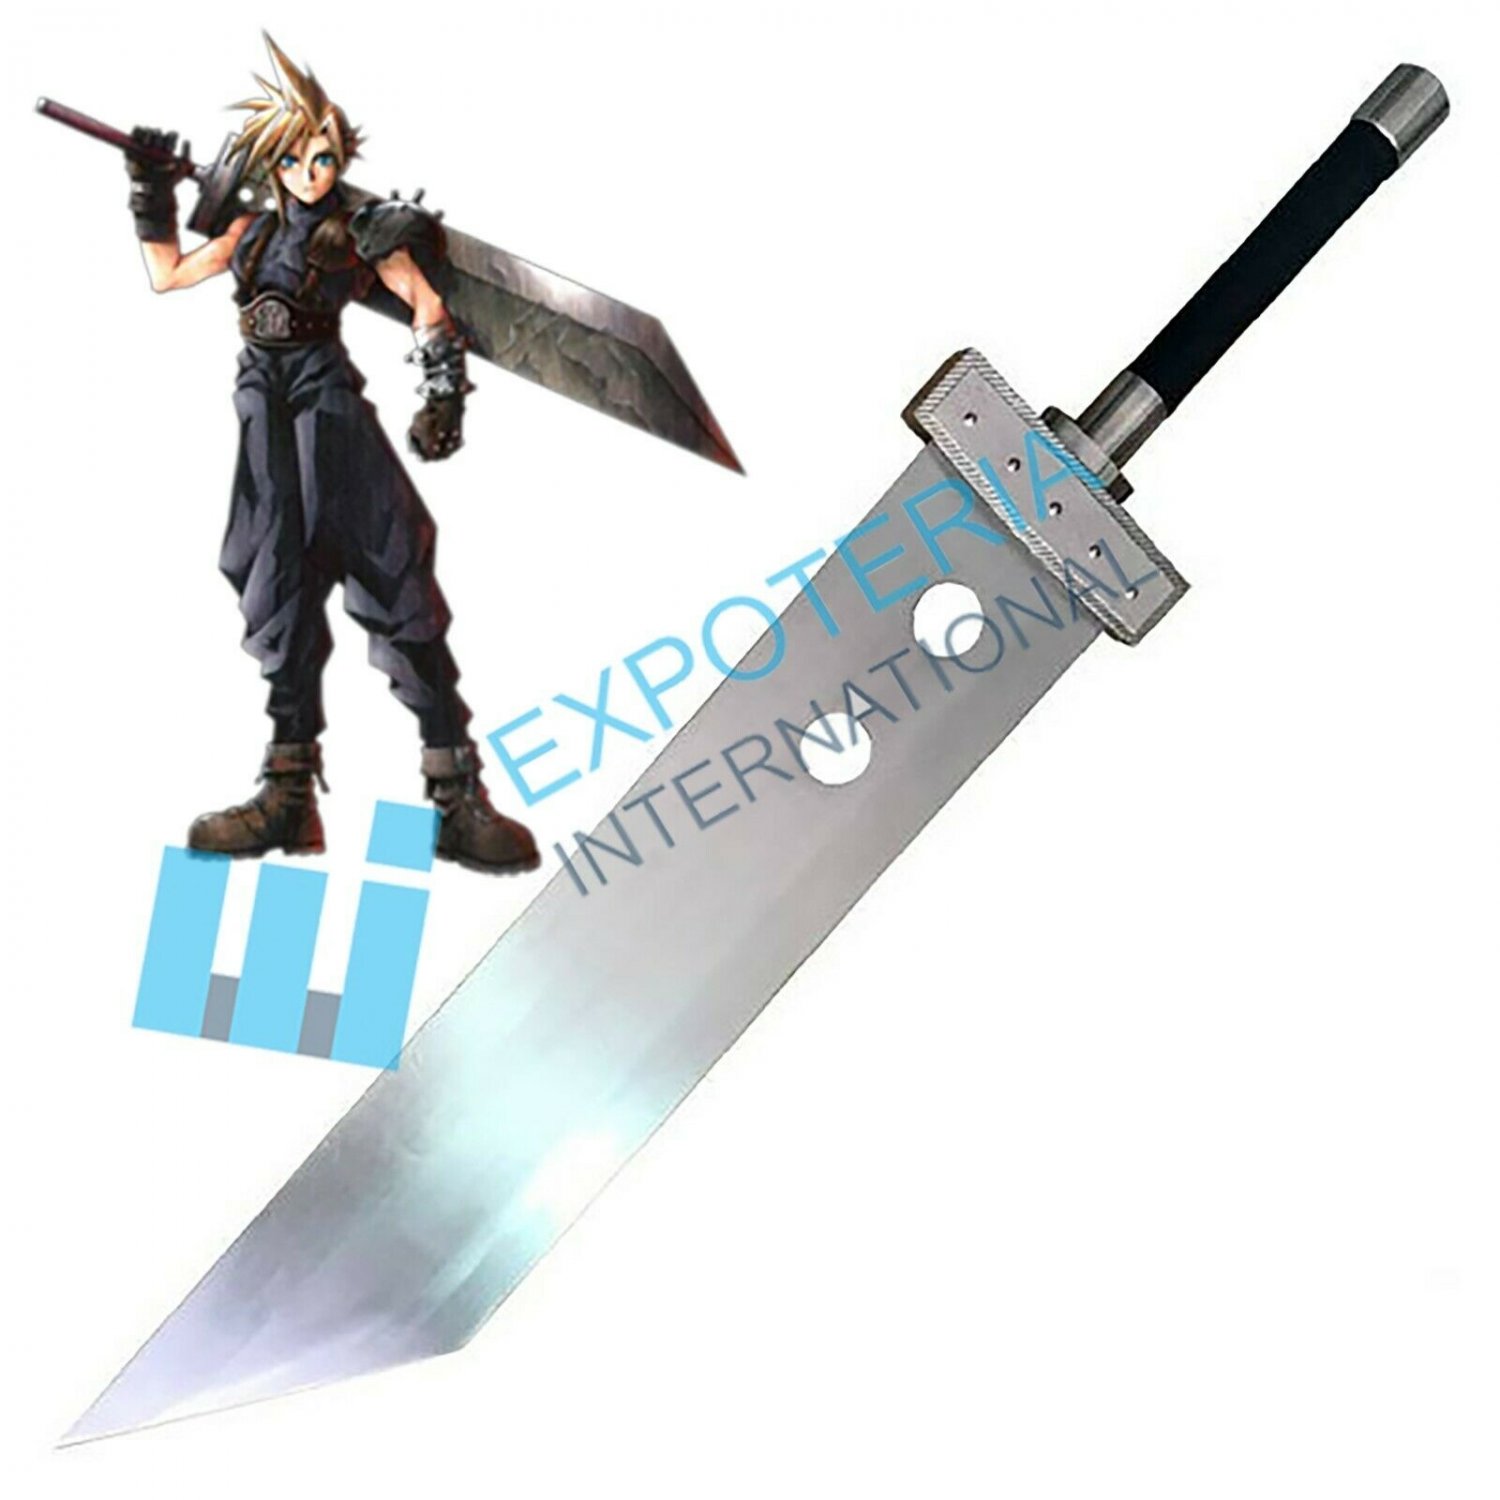 Final Fantasy Cloud Strife Buster  52" Sword with Stand & Leather Sheath